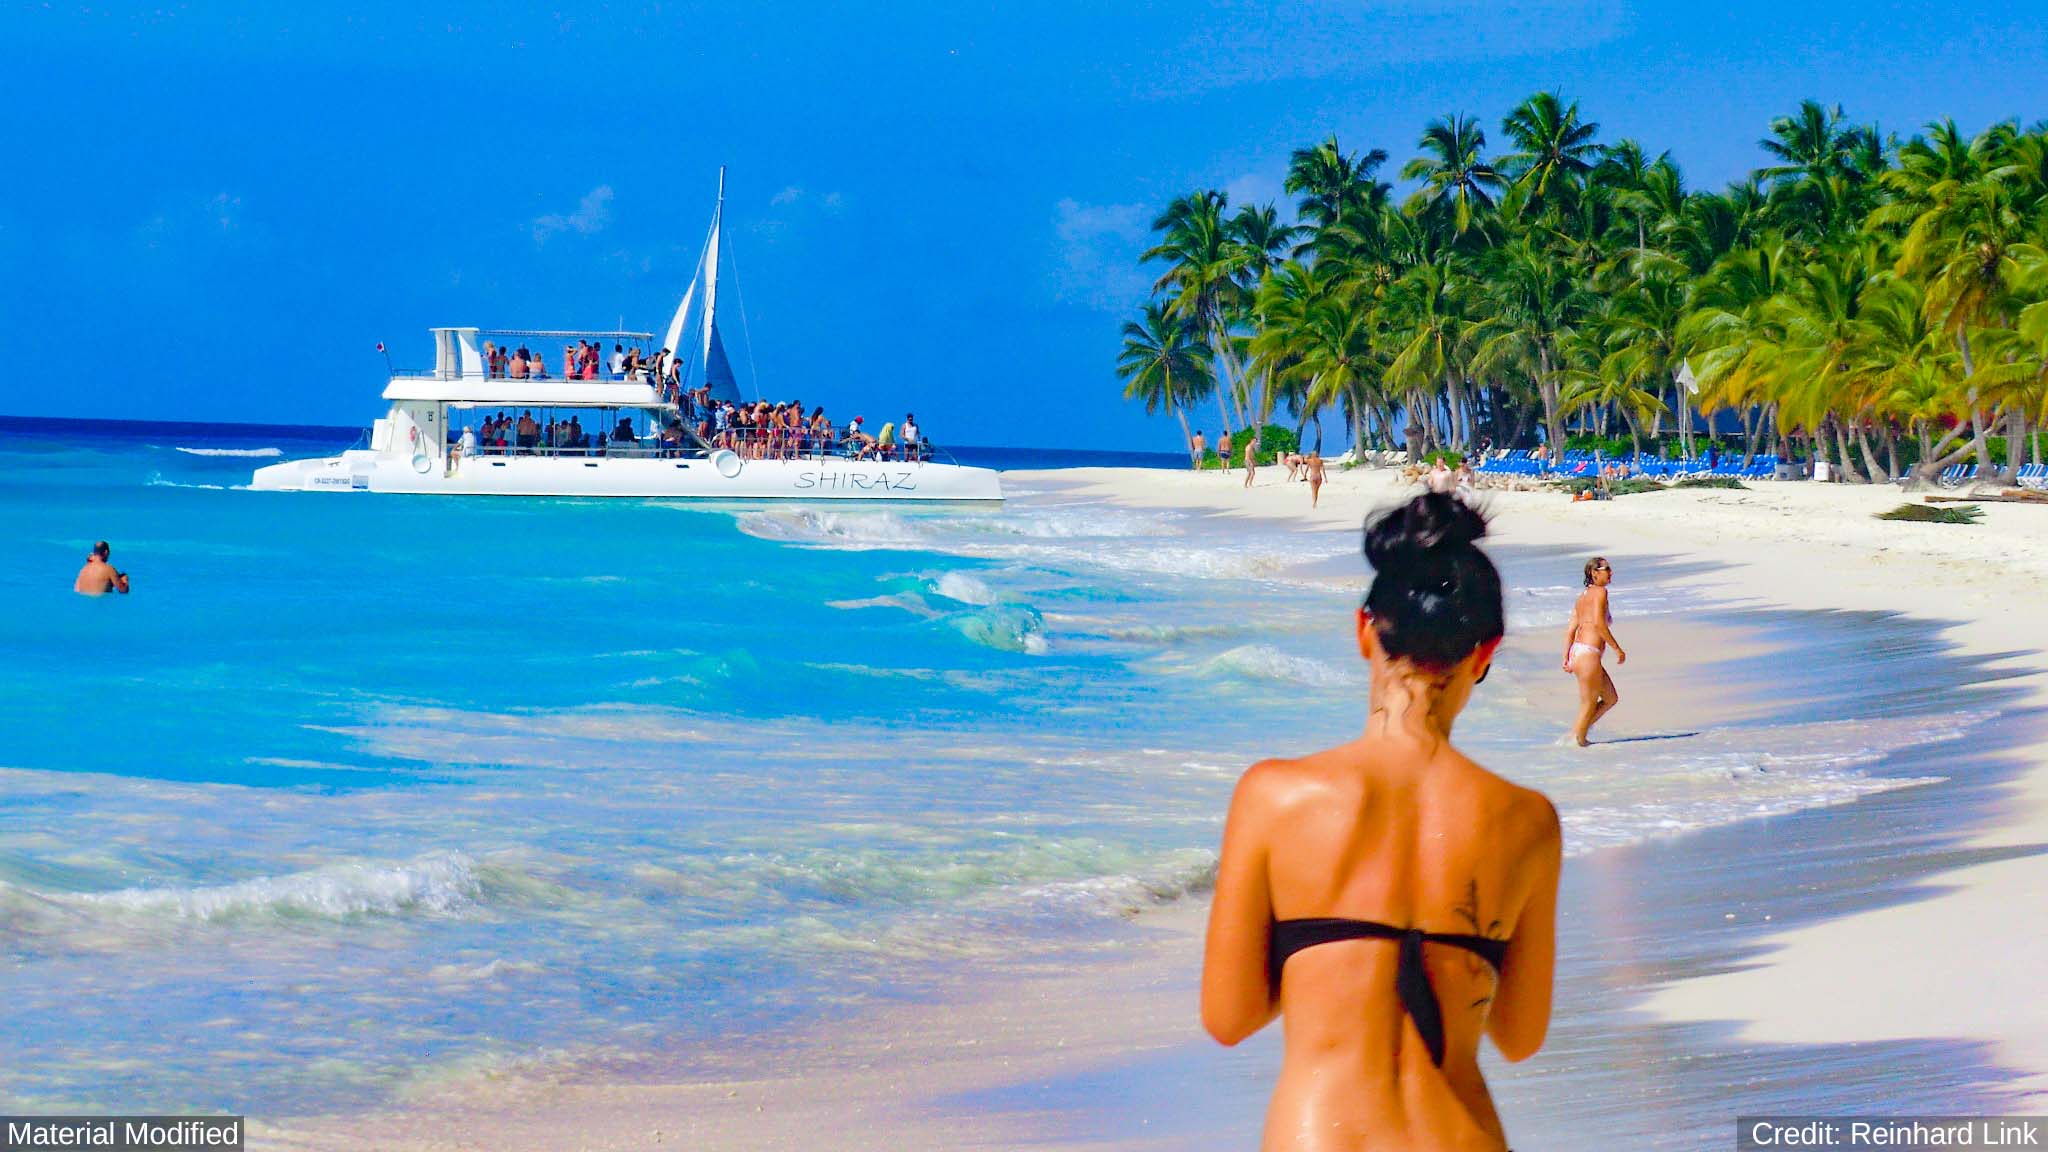 Dominican Republic: See & Experience Almost it ALL in 6 Days, 1st Class Traveling